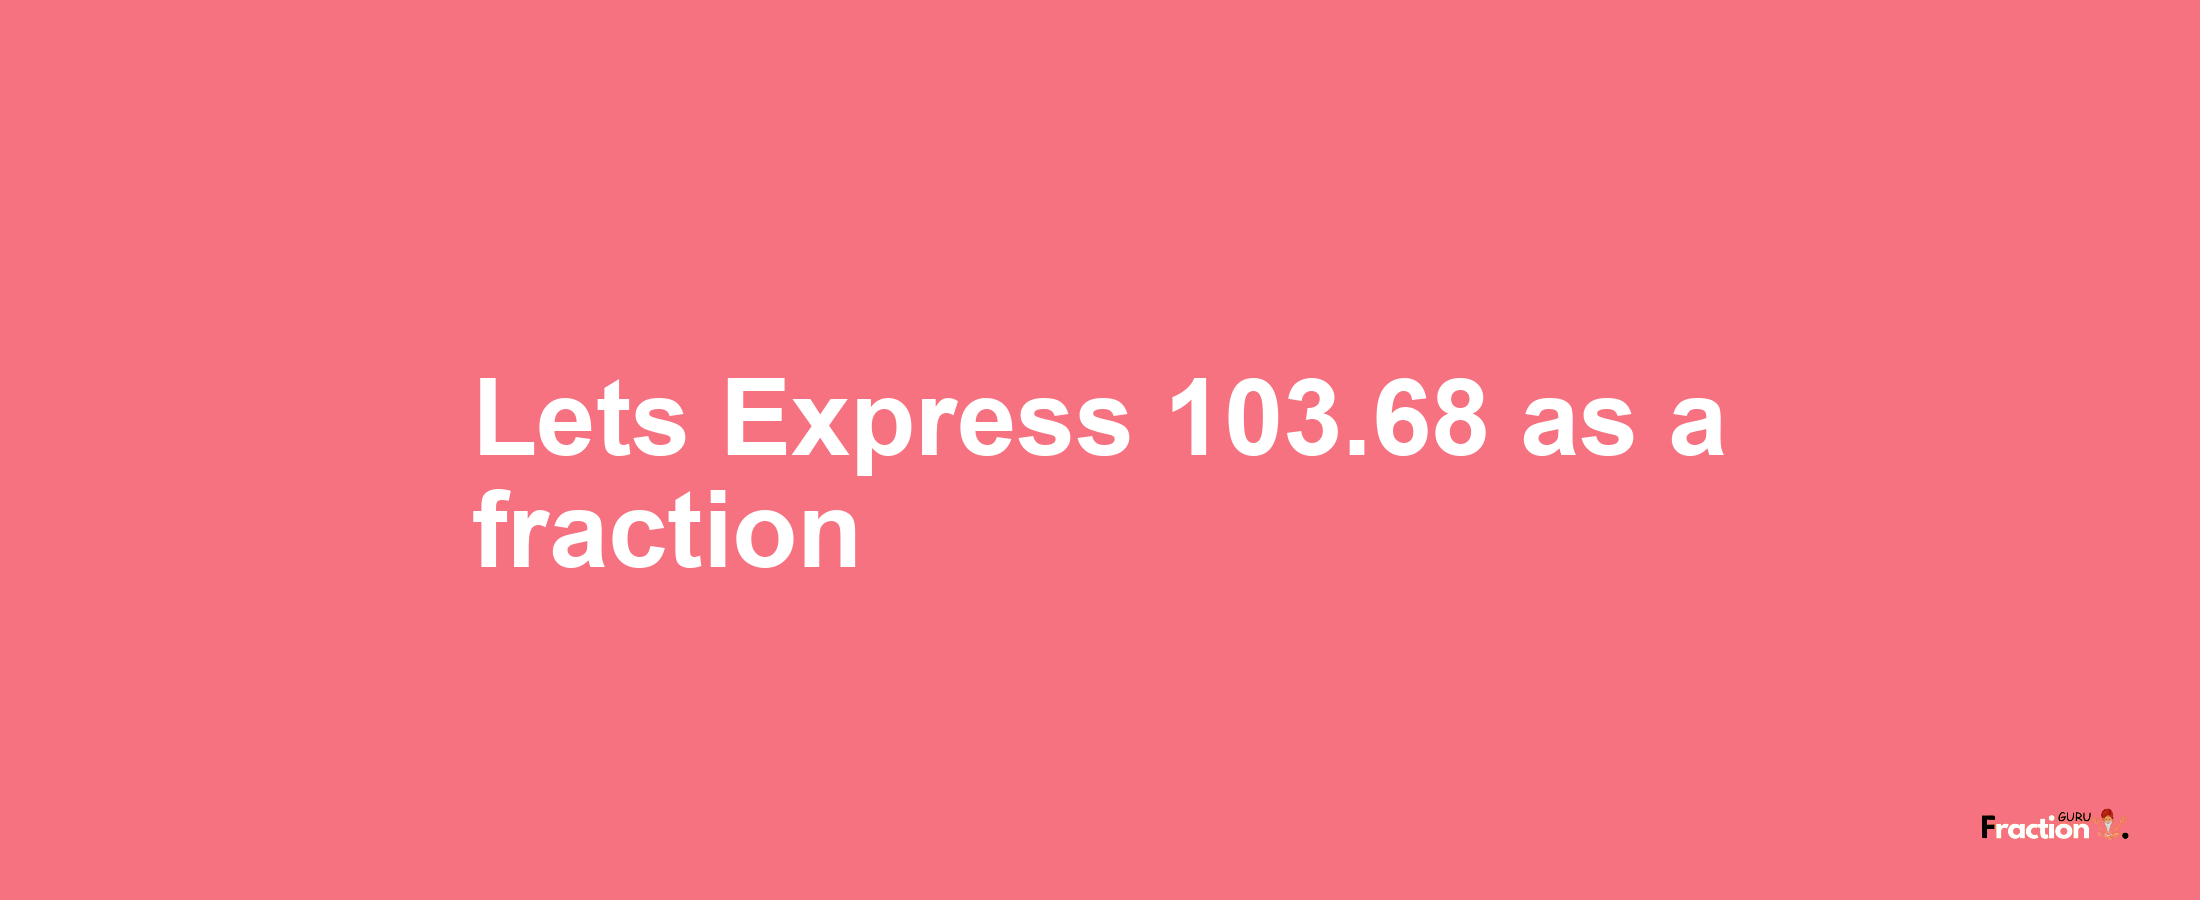 Lets Express 103.68 as afraction